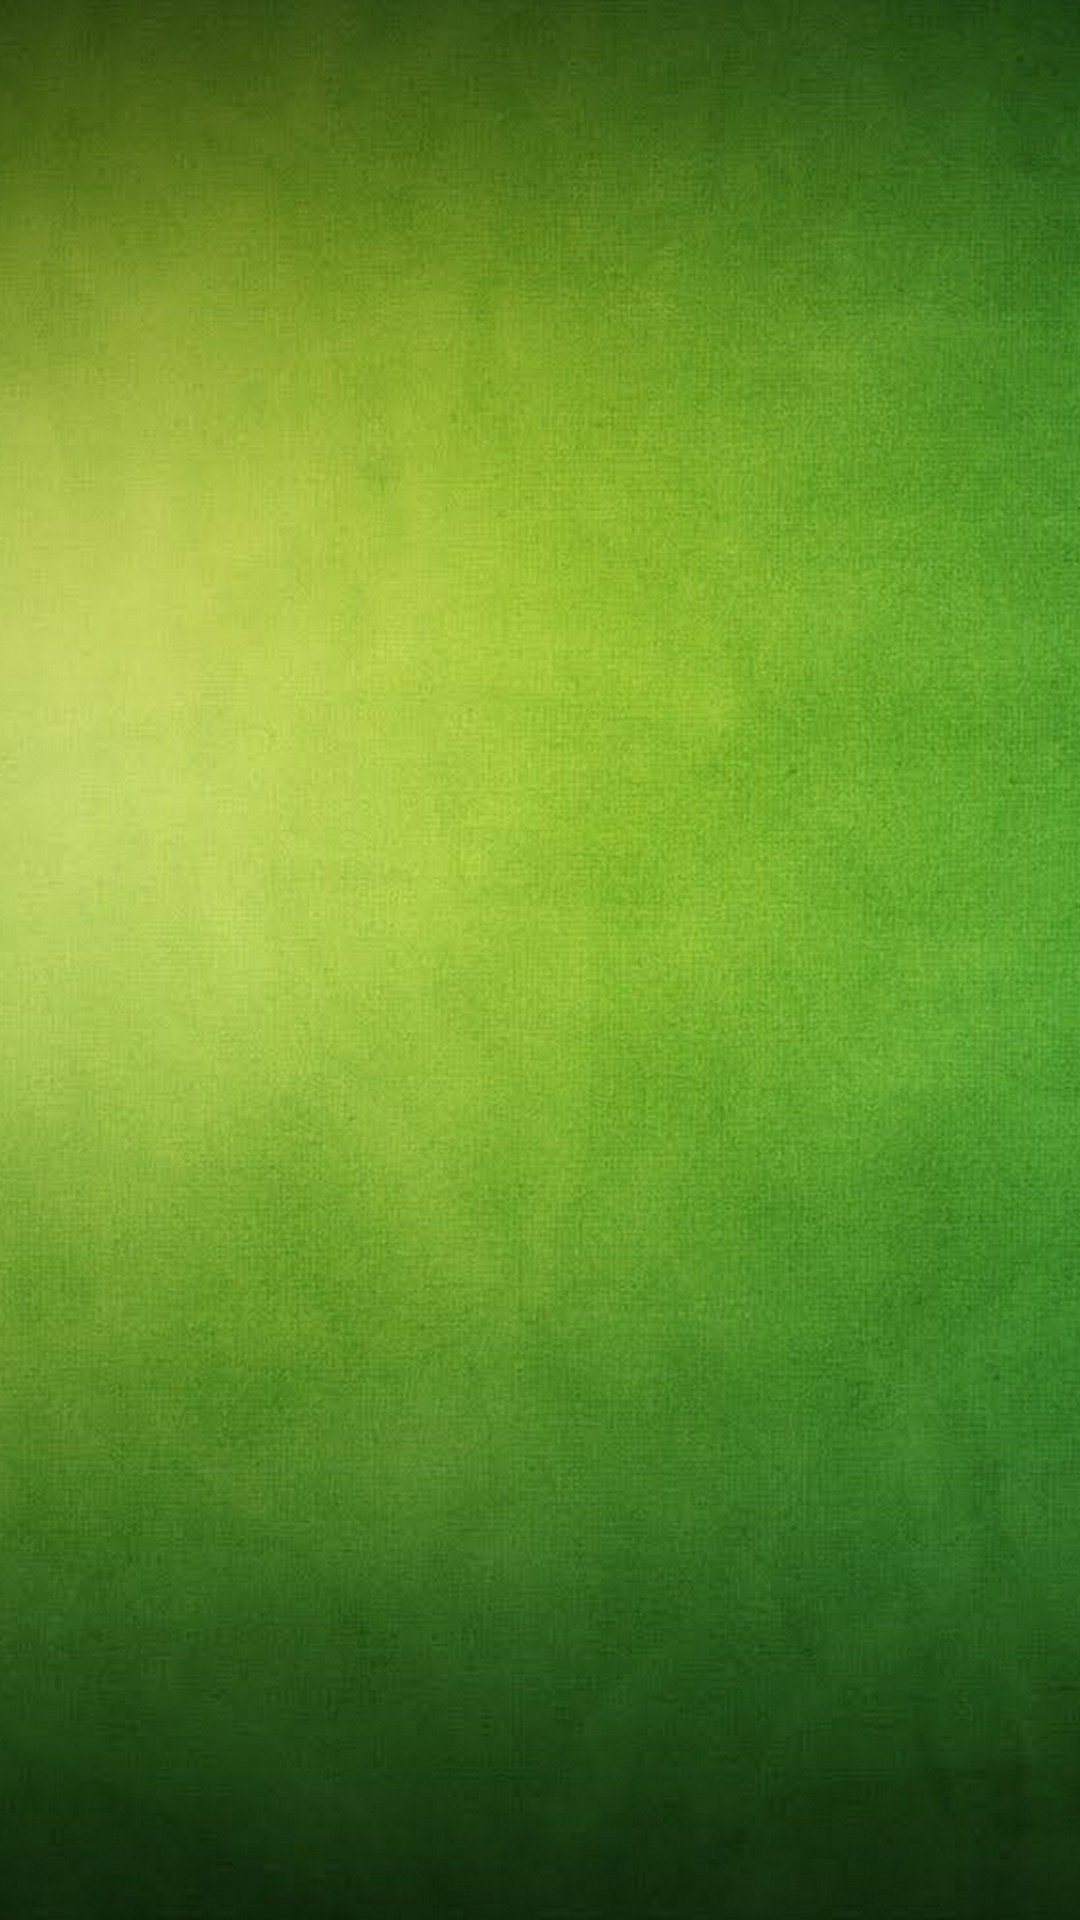 Iphone 7 Wallpaper Lime Green With Image Resolution - Trippy Background Lime Green - HD Wallpaper 